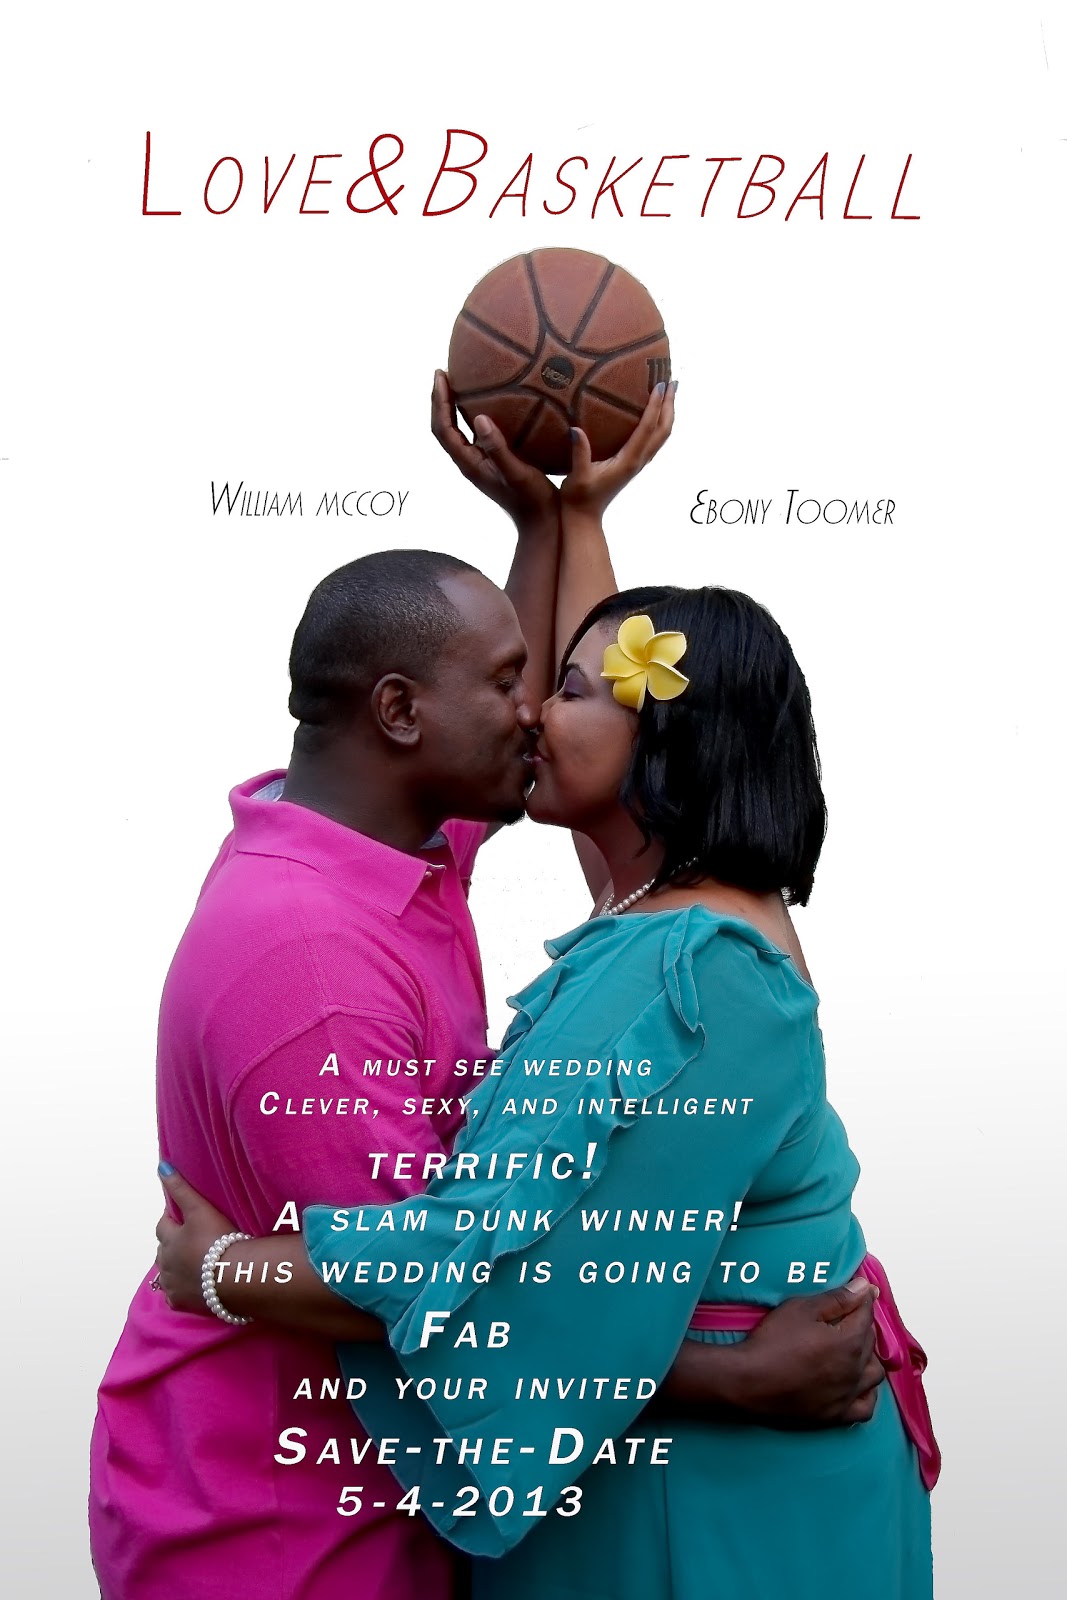 Pin Love And Basketball Quotes Tumblr on Pinterest